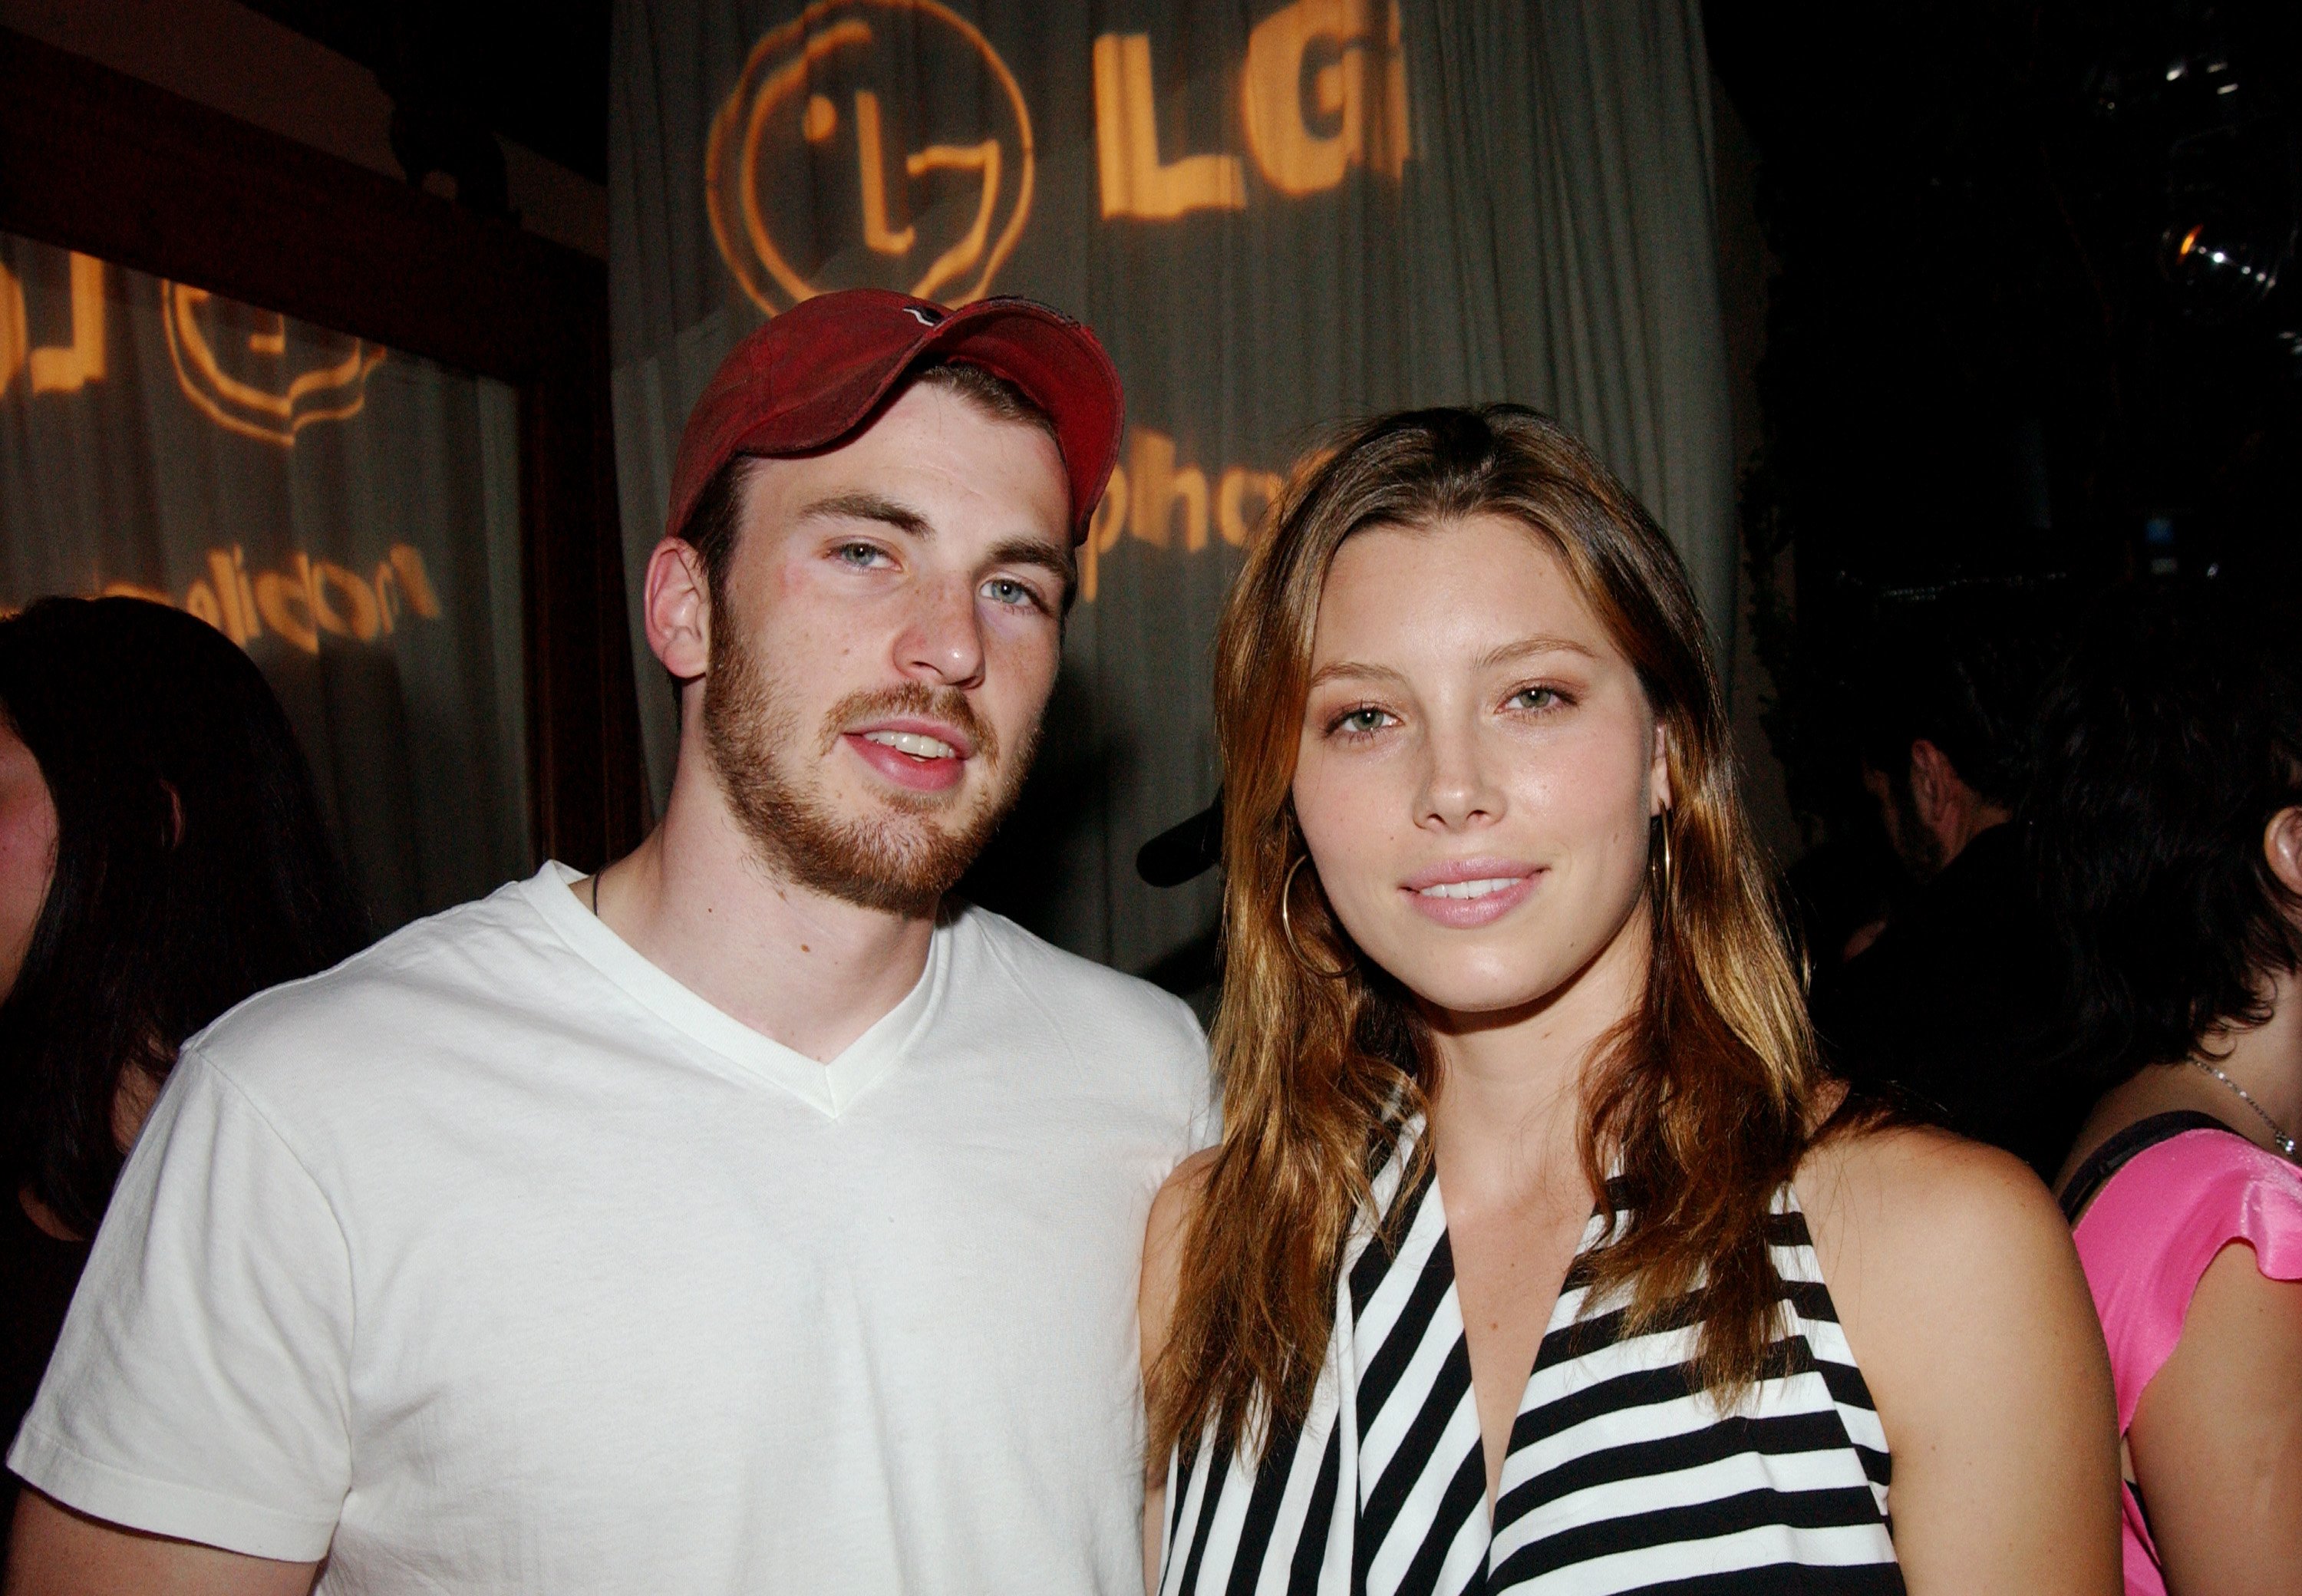 Chris Evans and Jessica Biel at an event on August 7, 2003 | Source: Getty Images